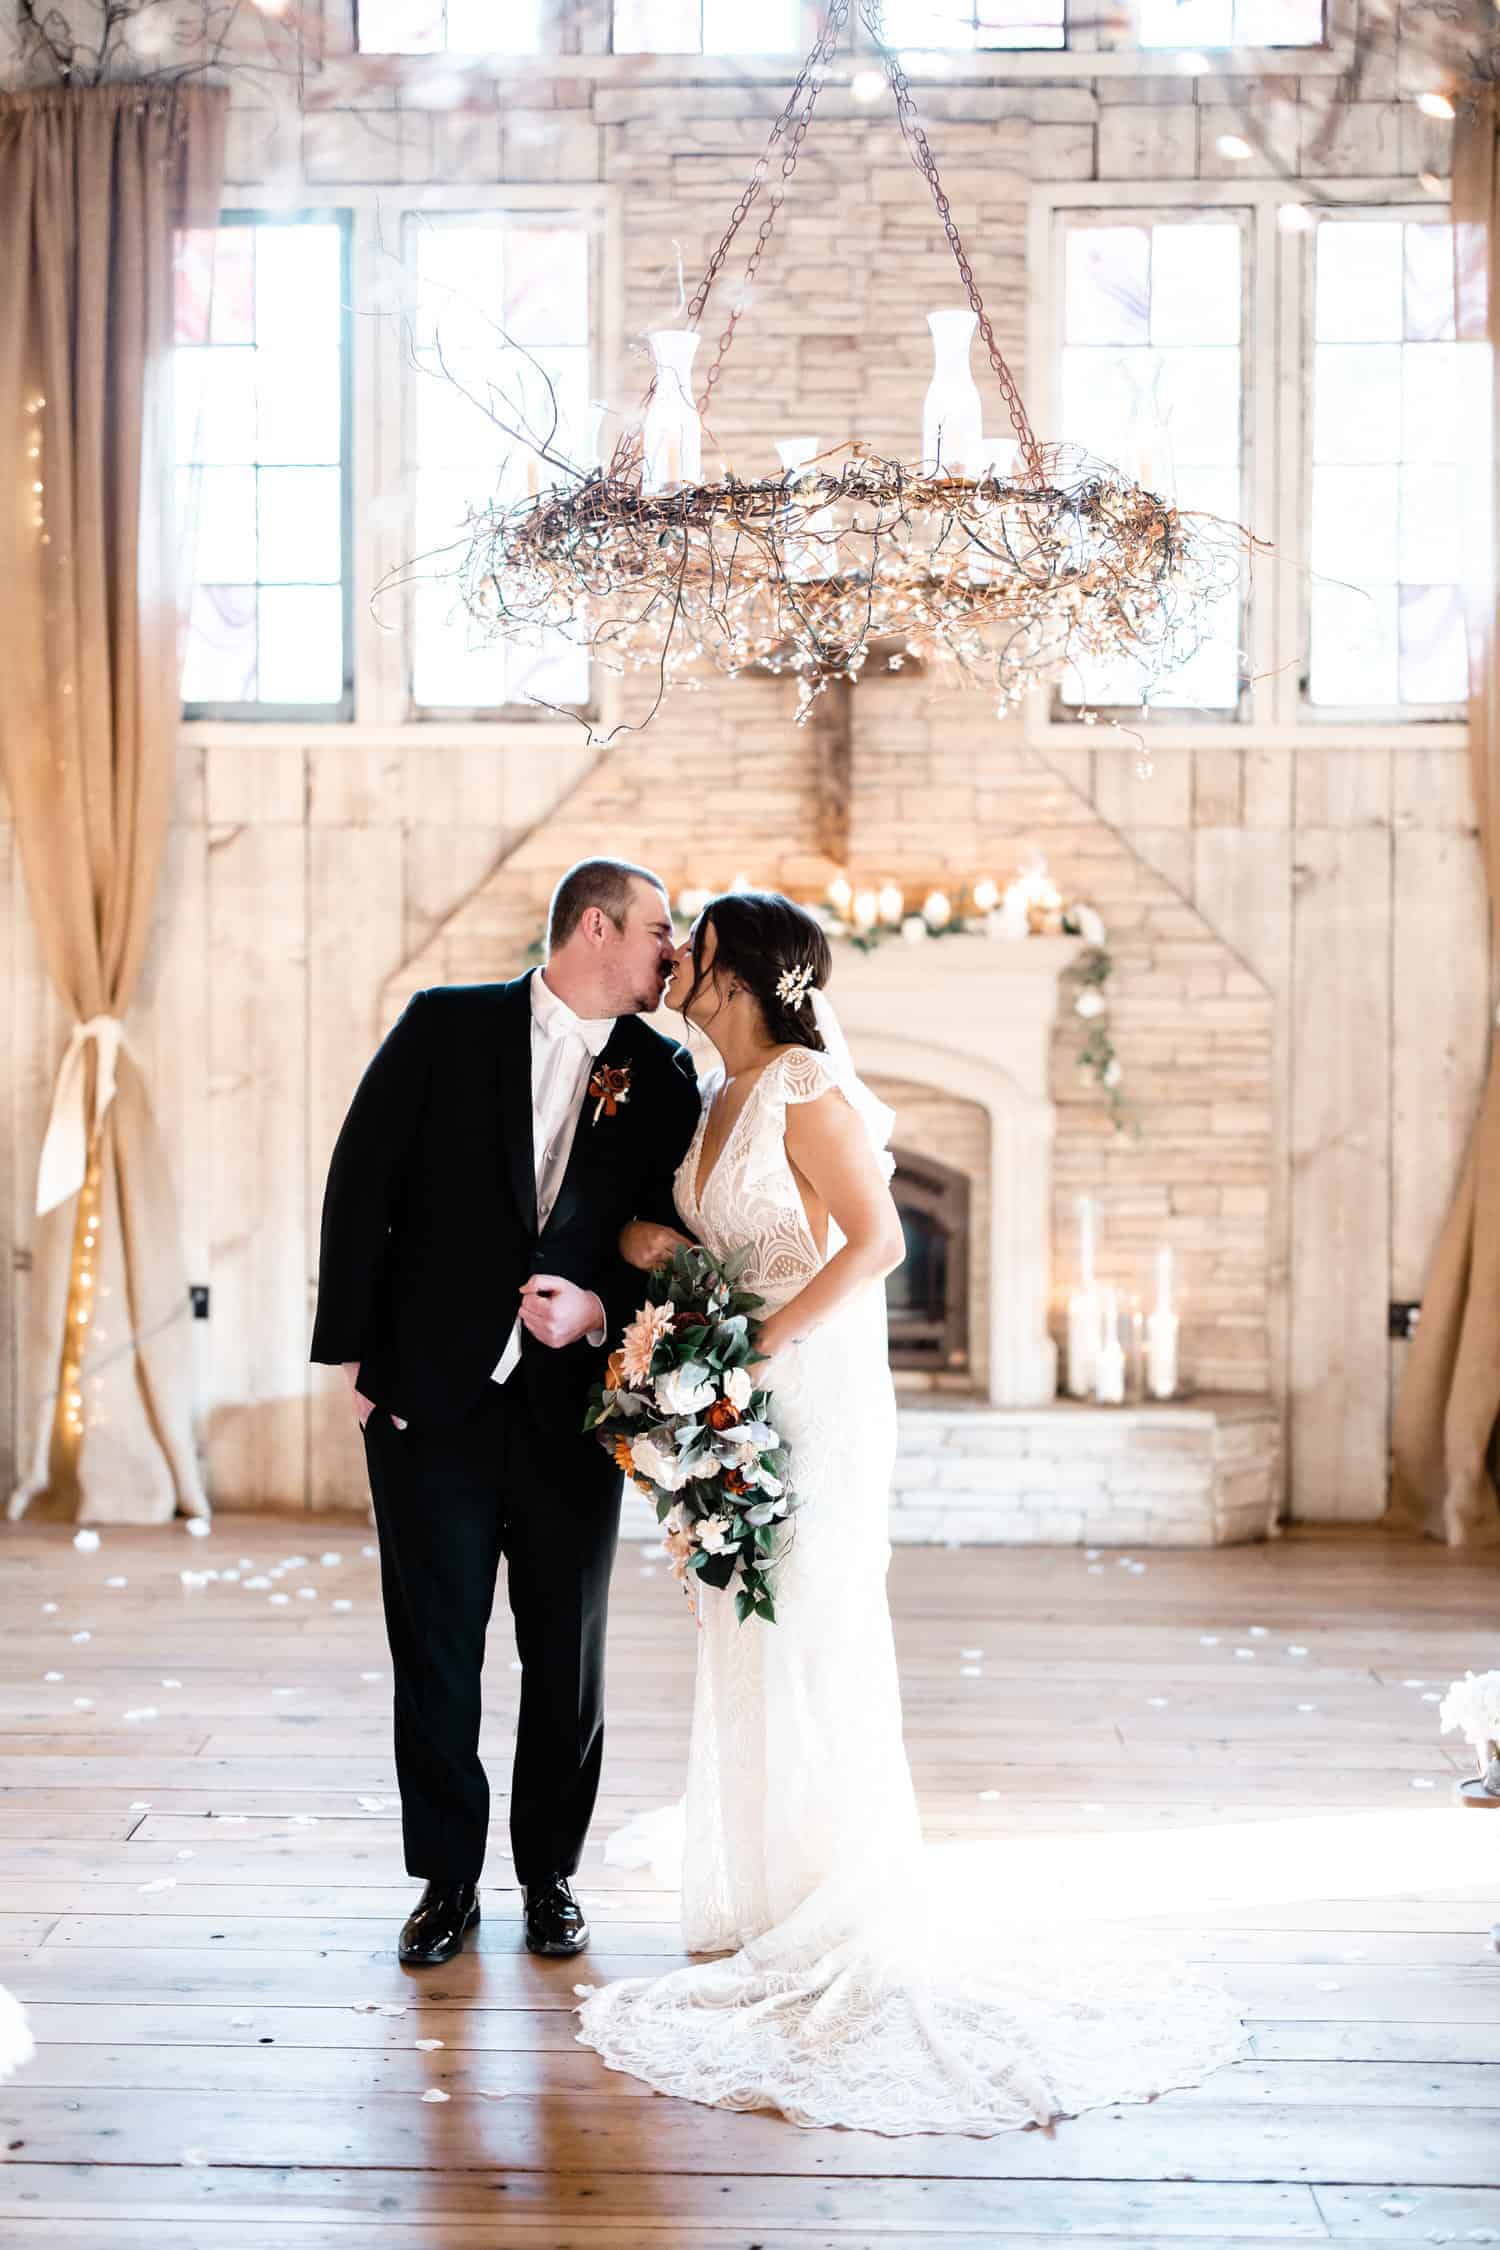 A bride and groom kissing in front of a chandelier.